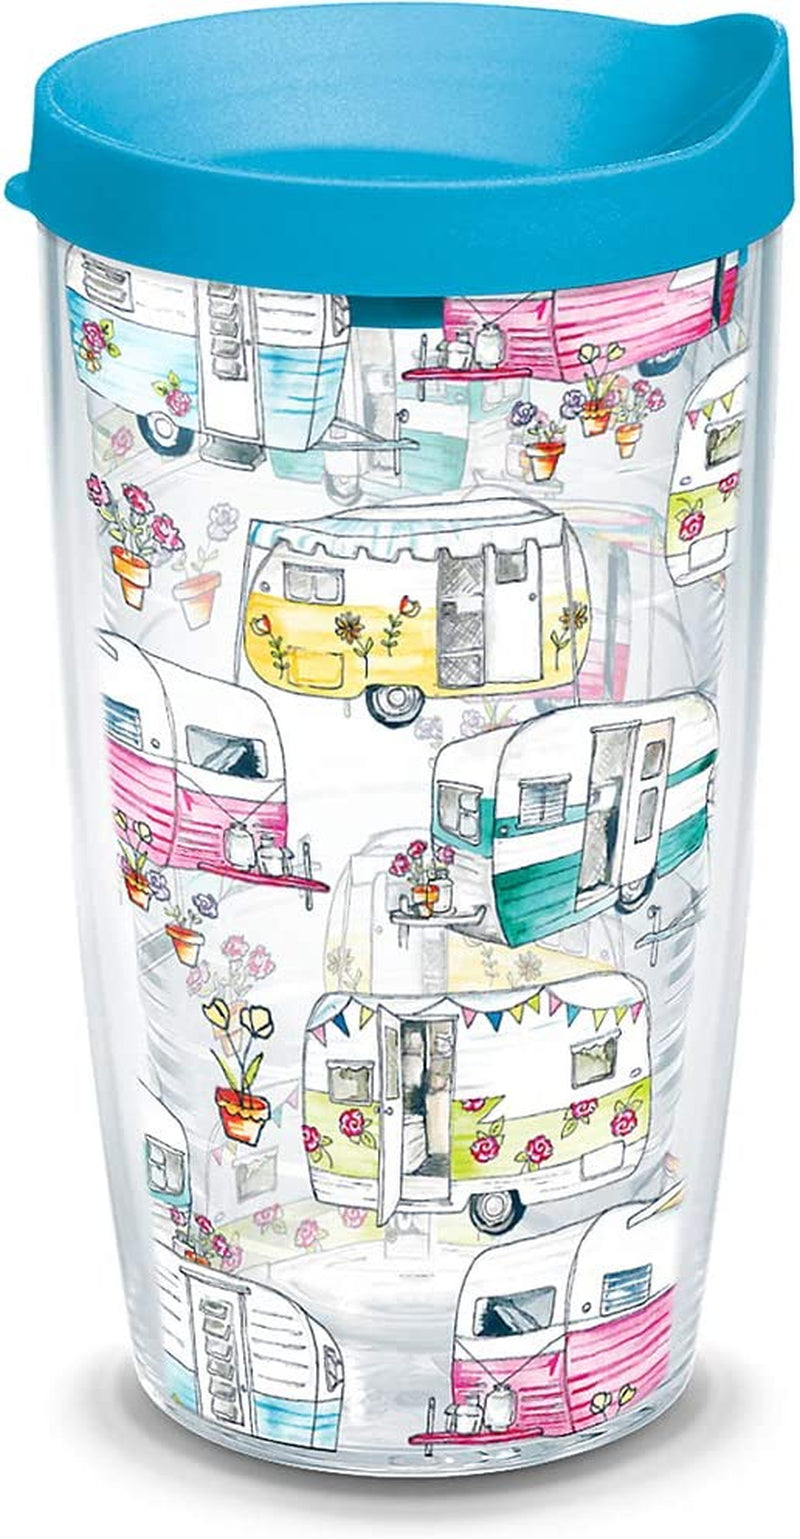 Tervis Made in USA Double Walled Colorful Camper Insulated Tumbler Cup Keeps Drinks Cold & Hot, 16Oz, Clear Home & Garden > Kitchen & Dining > Tableware > Drinkware Tervis Classic - Lidded 16oz 